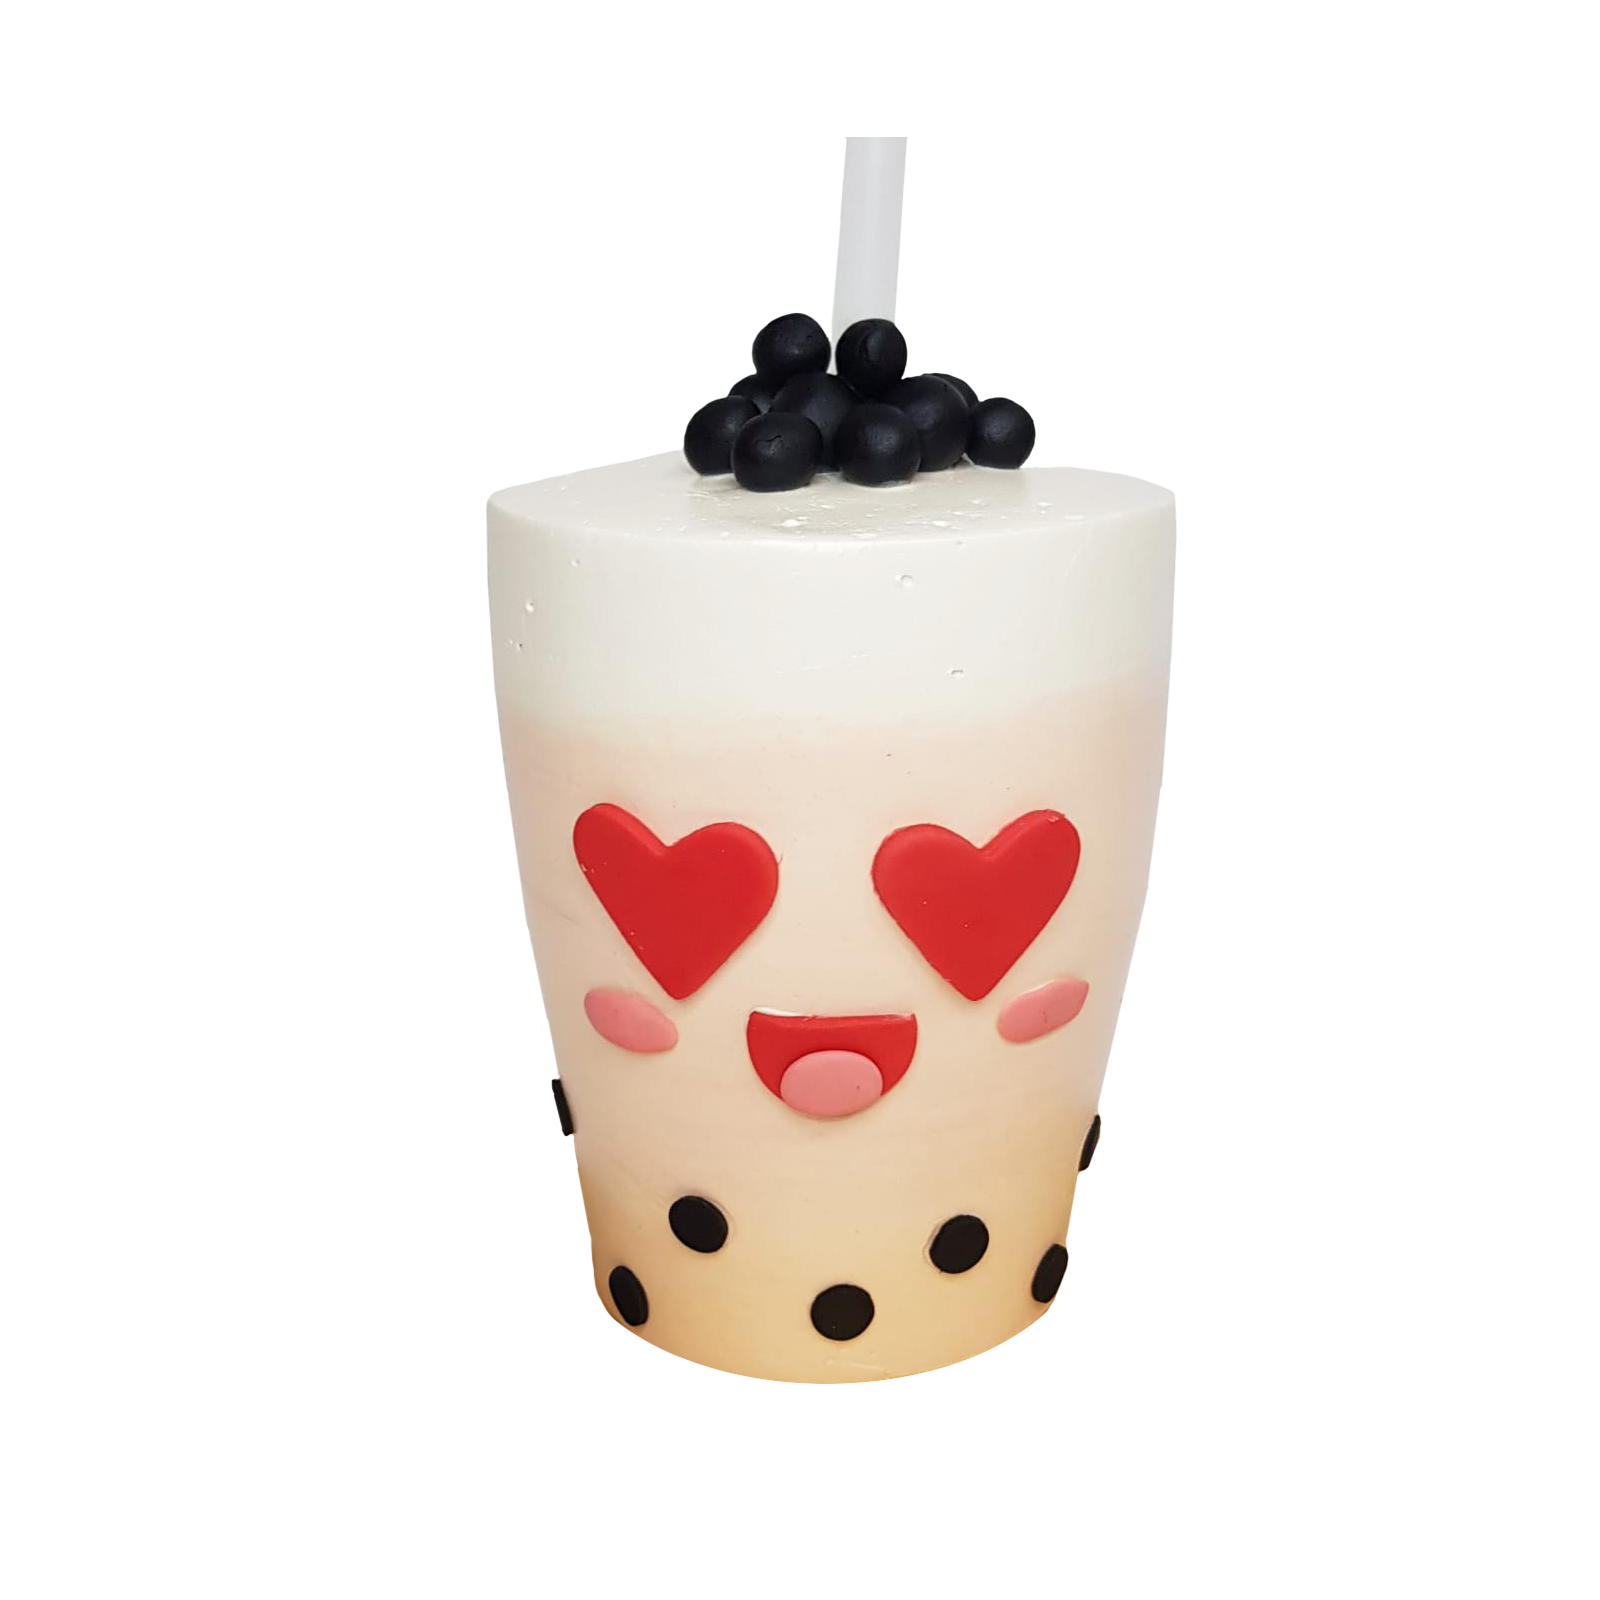 Real Bubble Tea Drink in a Cake 2